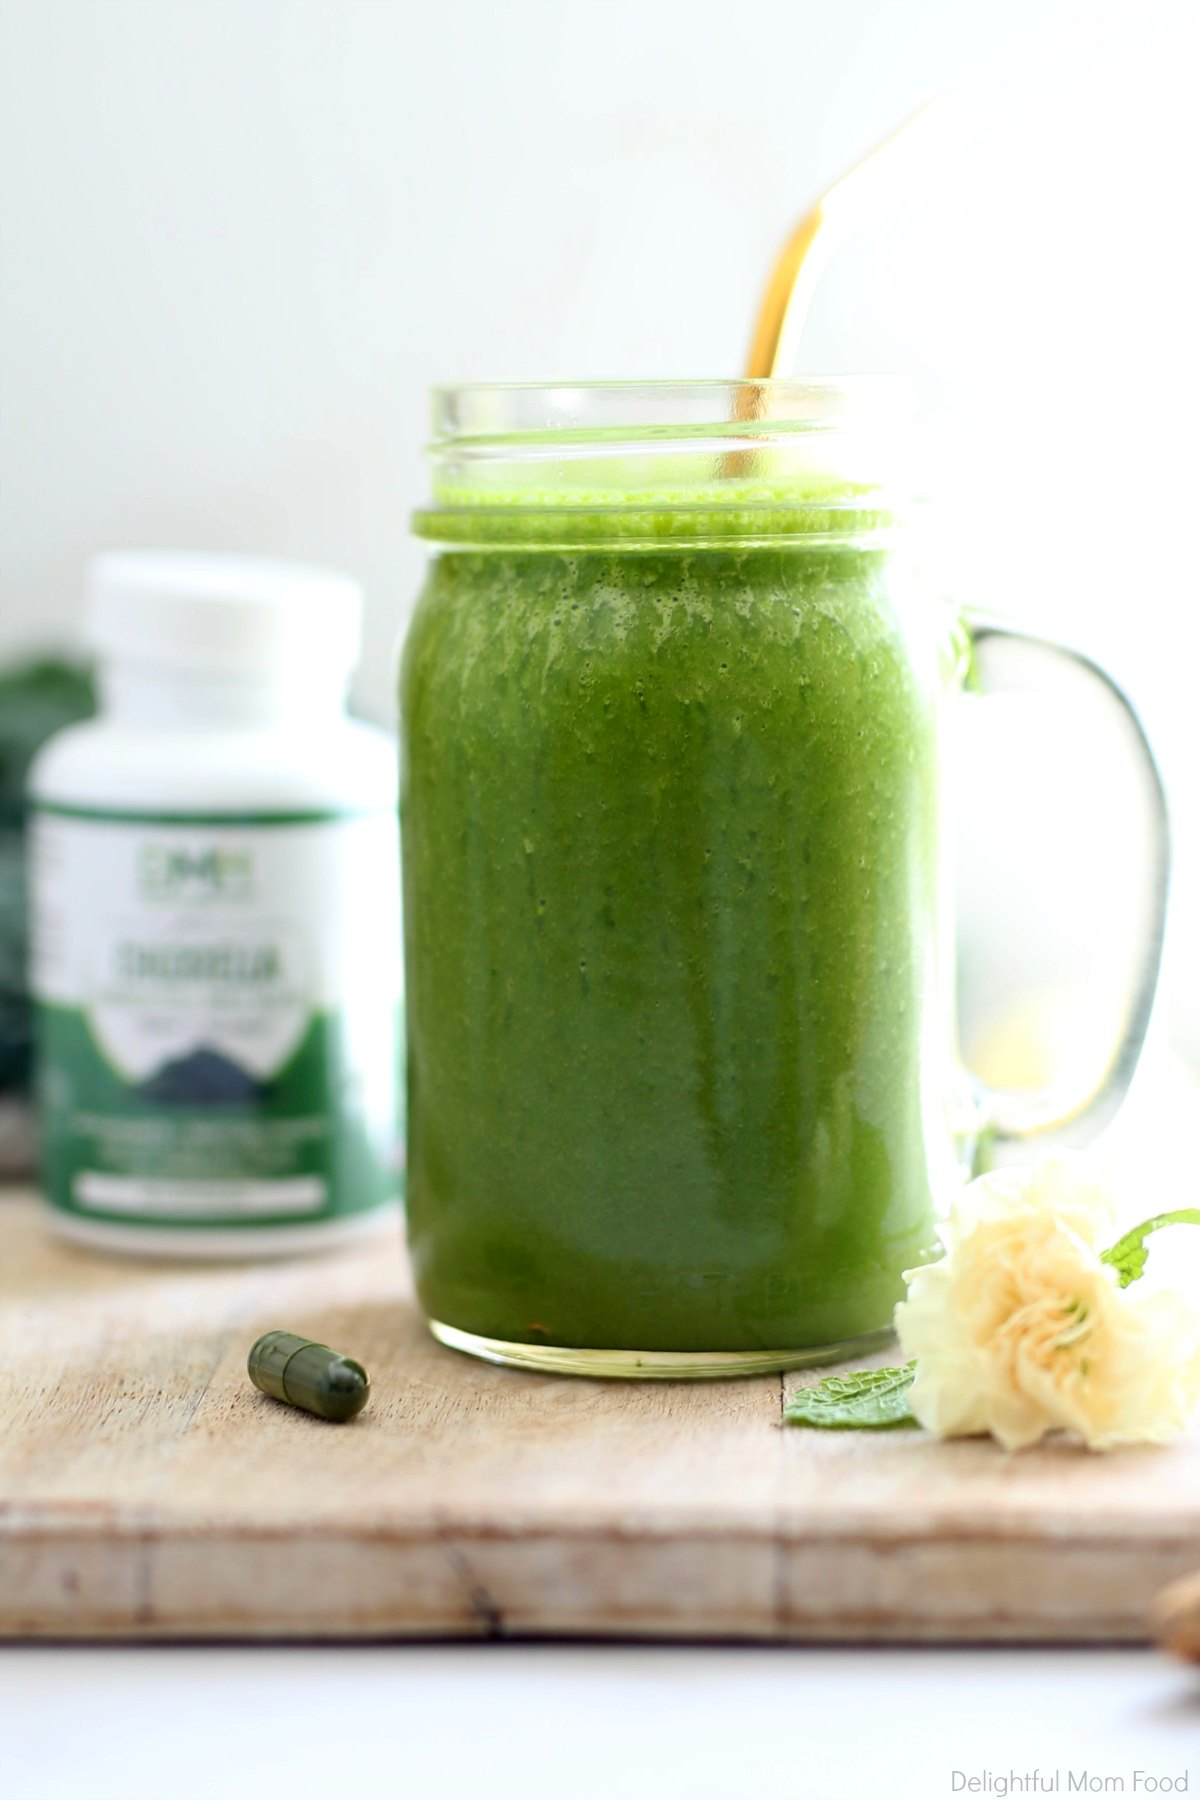 This chlorella detox smoothie is bursting with delicious tropical flavors in a vibrant green color that is packed with superfoods, vitamins, minerals and antioxidants that detoxify the body from the inside out! #chlorella #detoxsmoothie #greensmoothie #vegan #detoxrecipe #smoothie #bestchlorella #chlorellasmoothie #breakfast #snack | Recipe at Delightful Mom Food